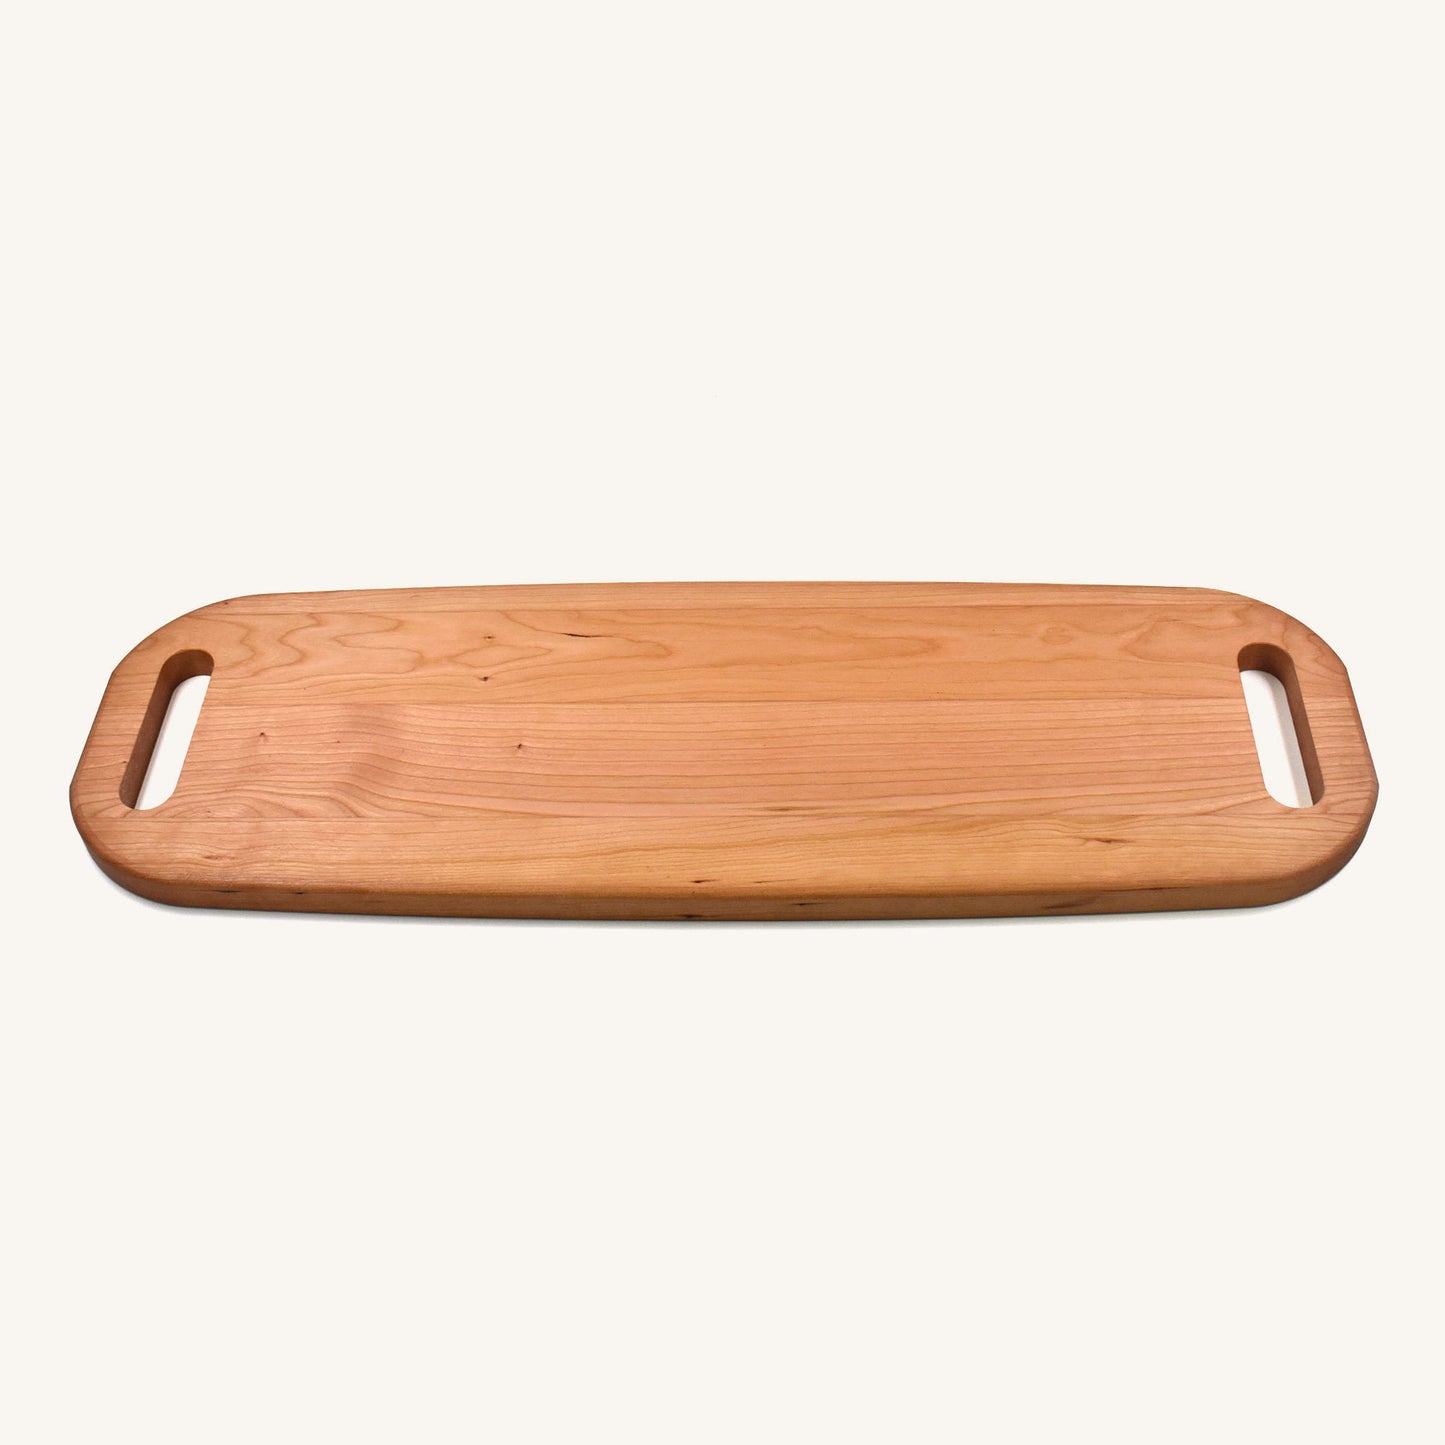 Wood Serving Tray with Handles on Both Ends with Mother's Day Designs